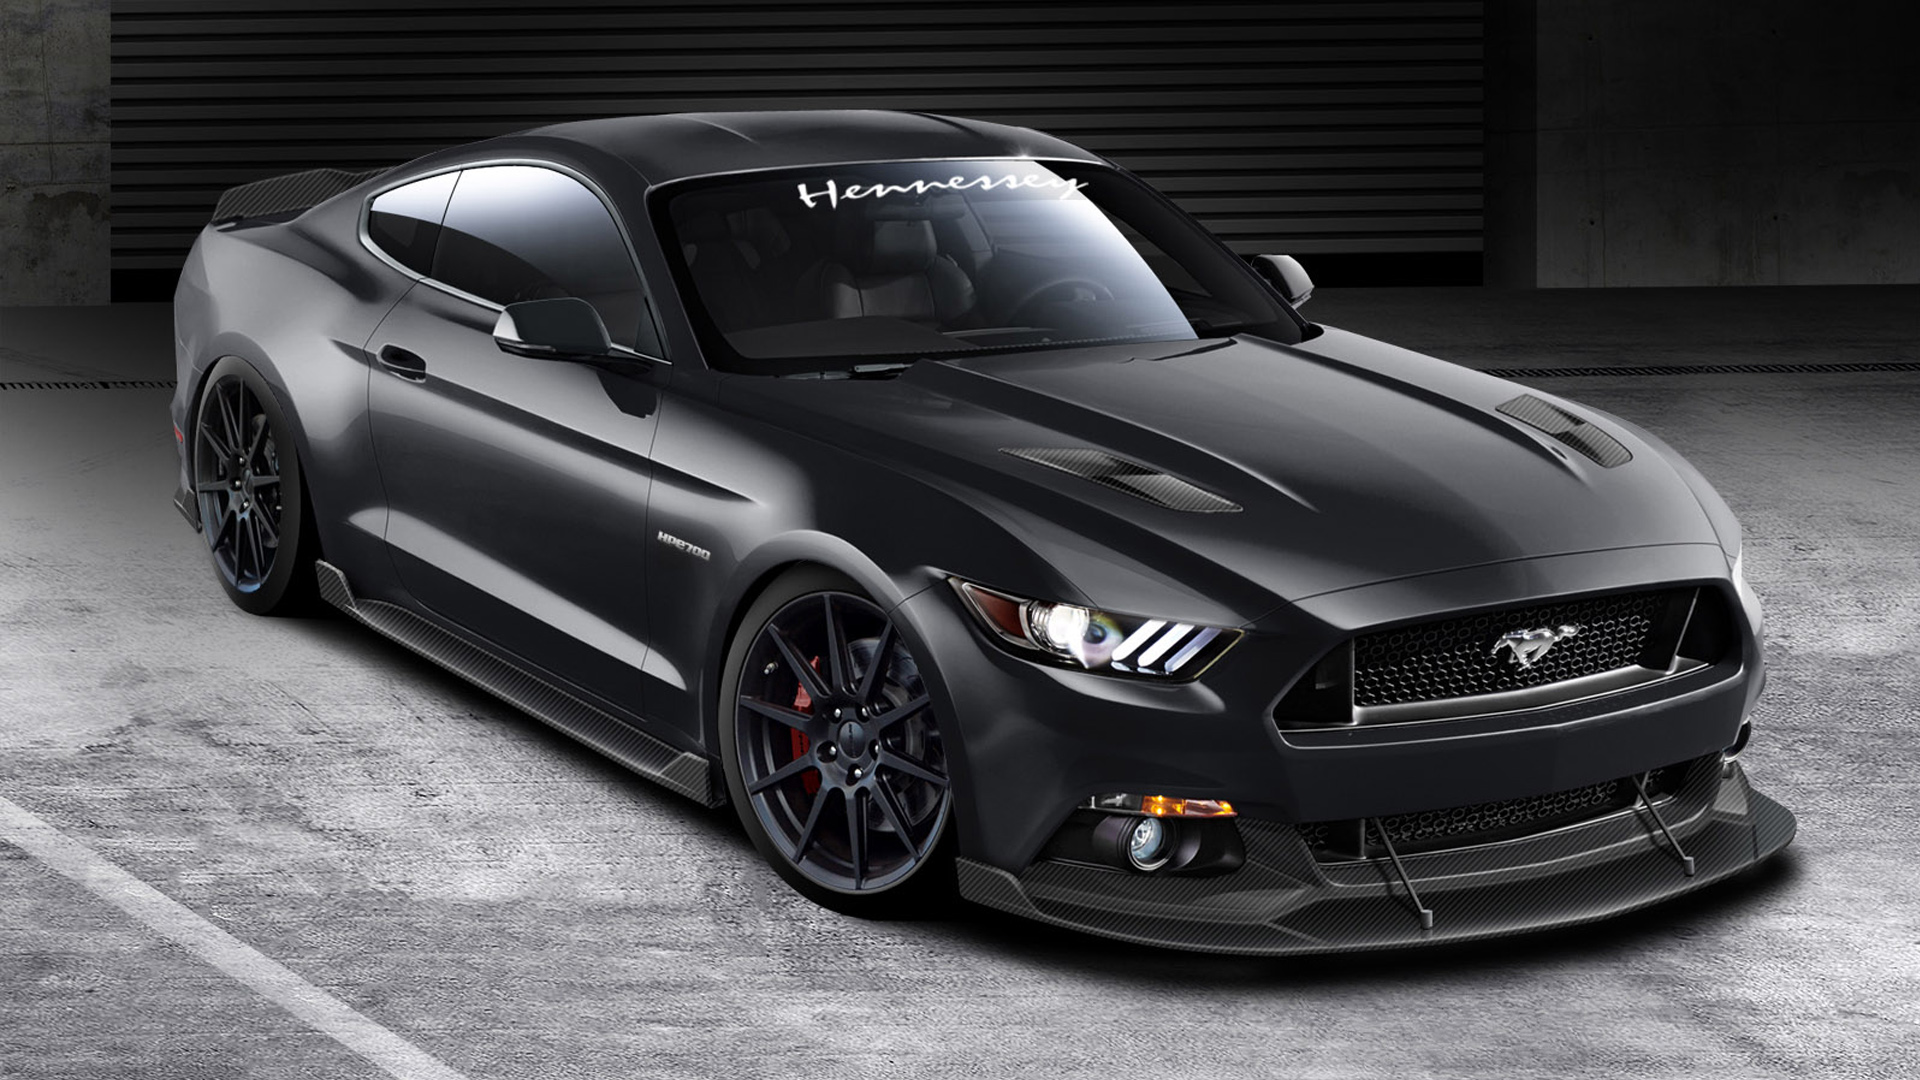 Hennessey Ford Mustang Gt Wallpaper HD Car